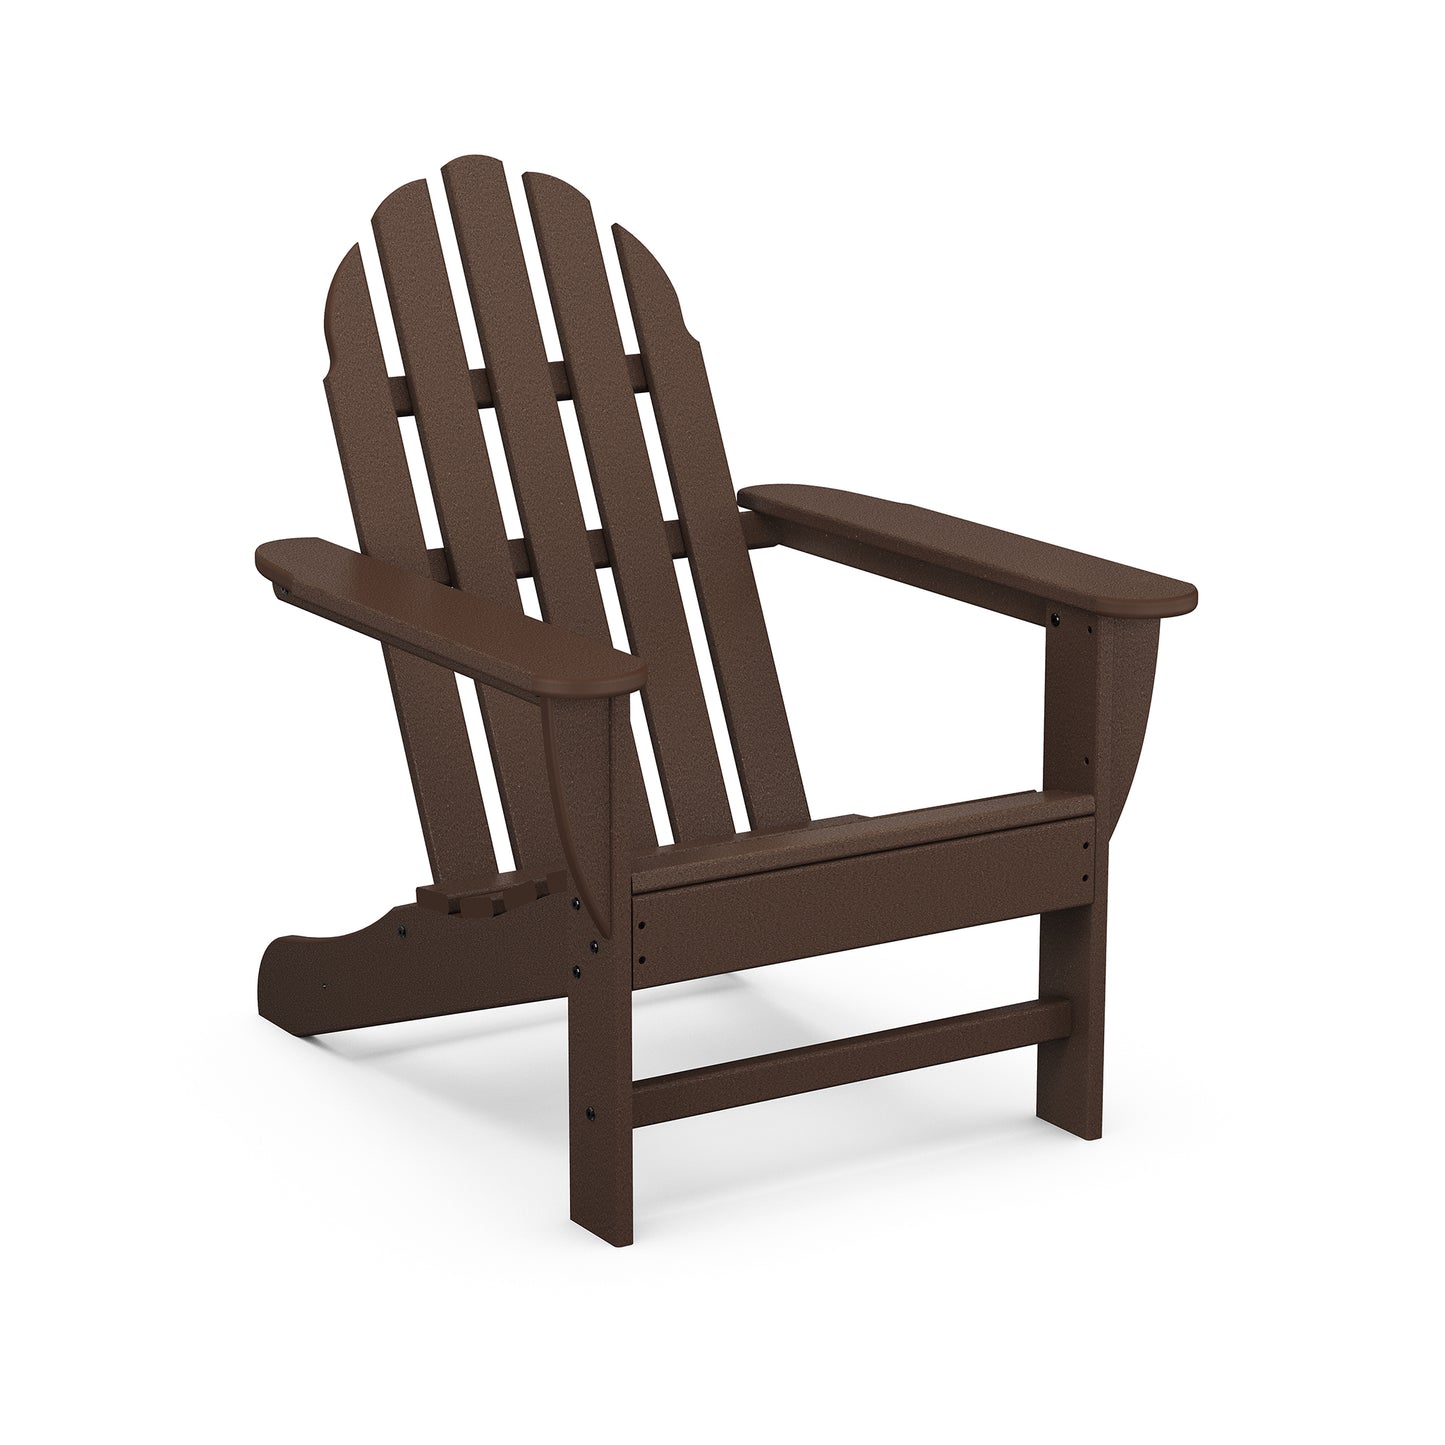 A POLYWOOD Classic Adirondack Chair made of durable POLYWOOD, featuring a tall, curved back and wide armrests, isolated on a white background.